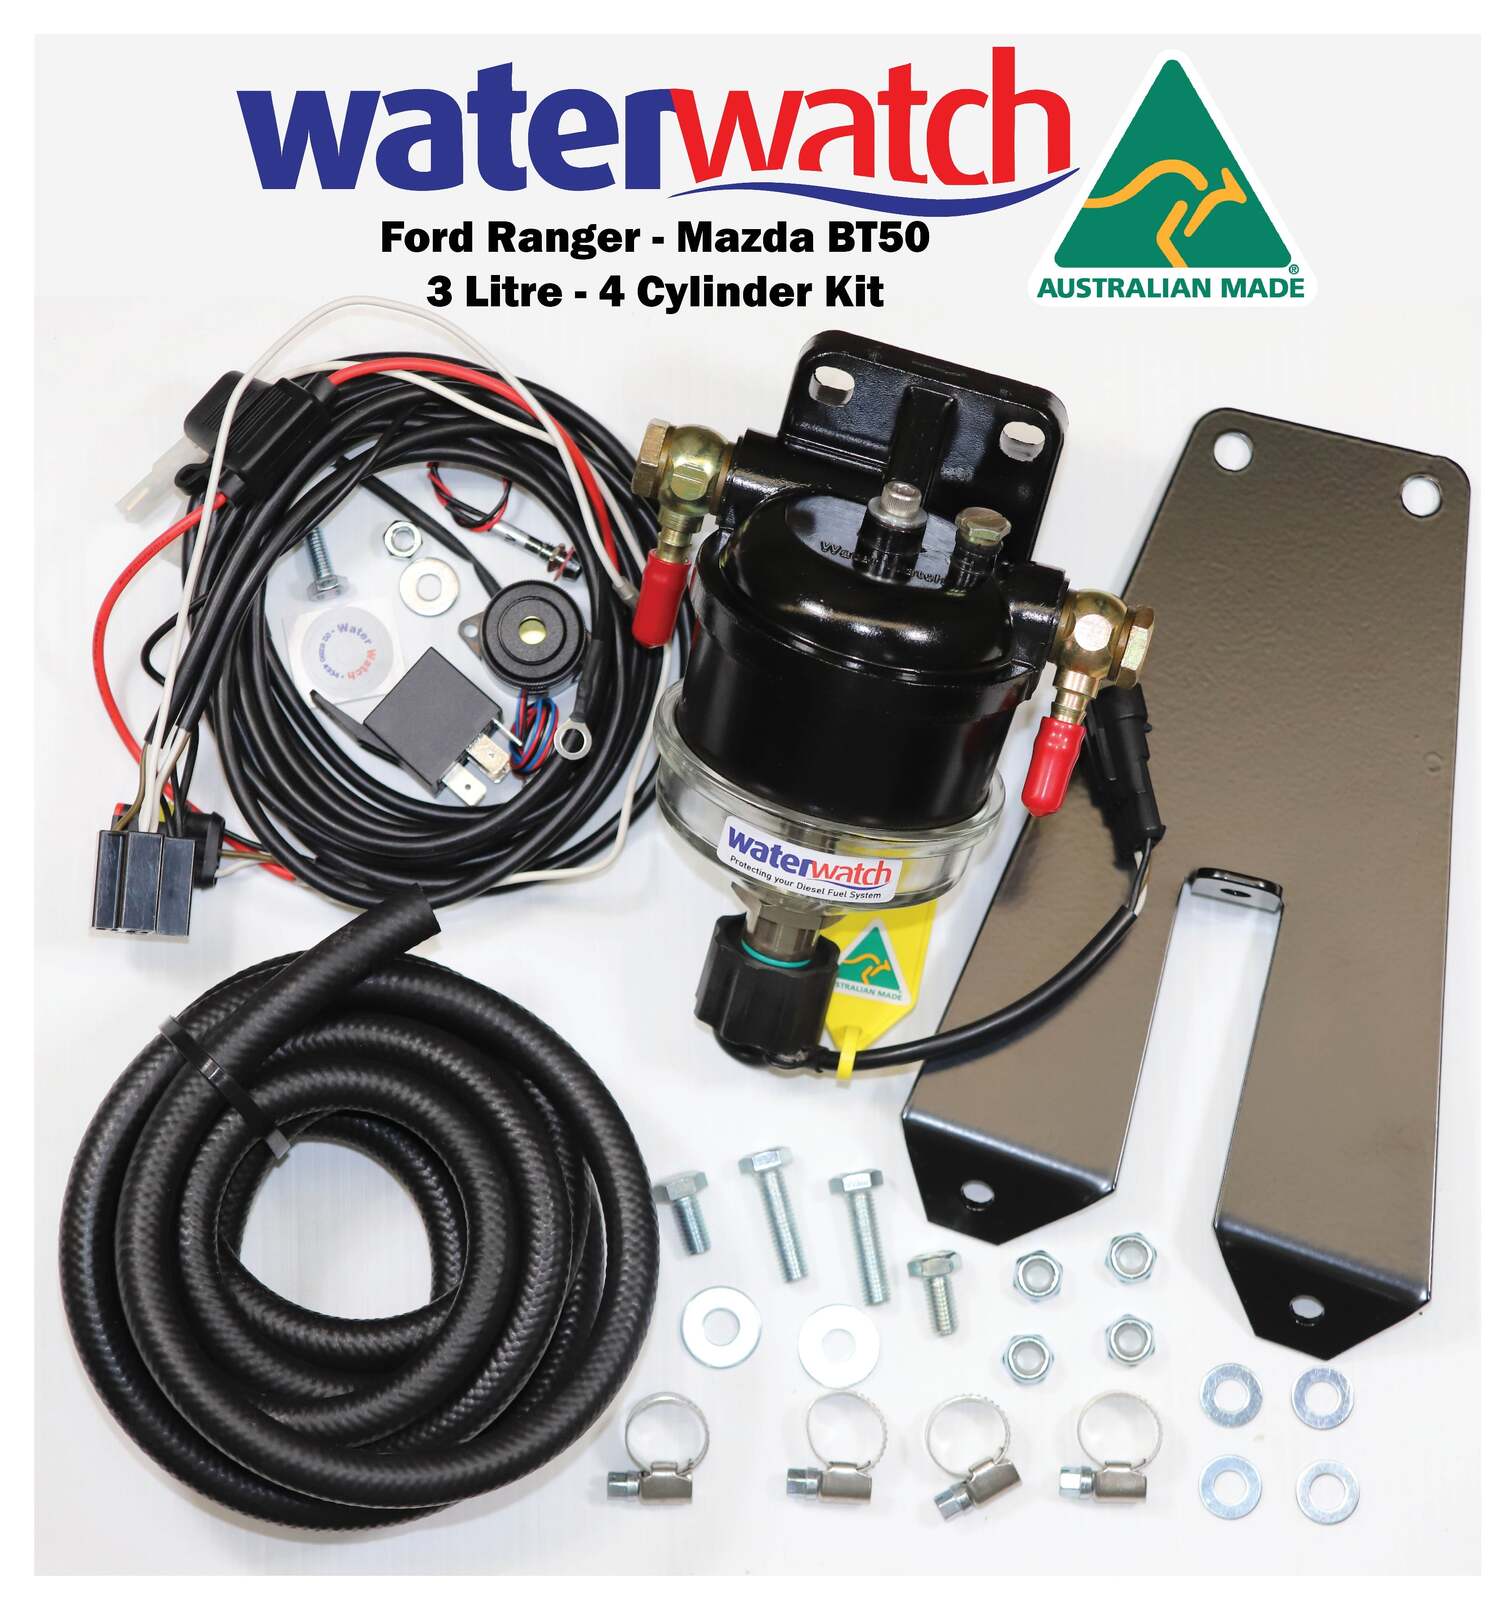 Diesel water watch for mazda bt50 (4cyl) - protection against diesel fuel contamination damage